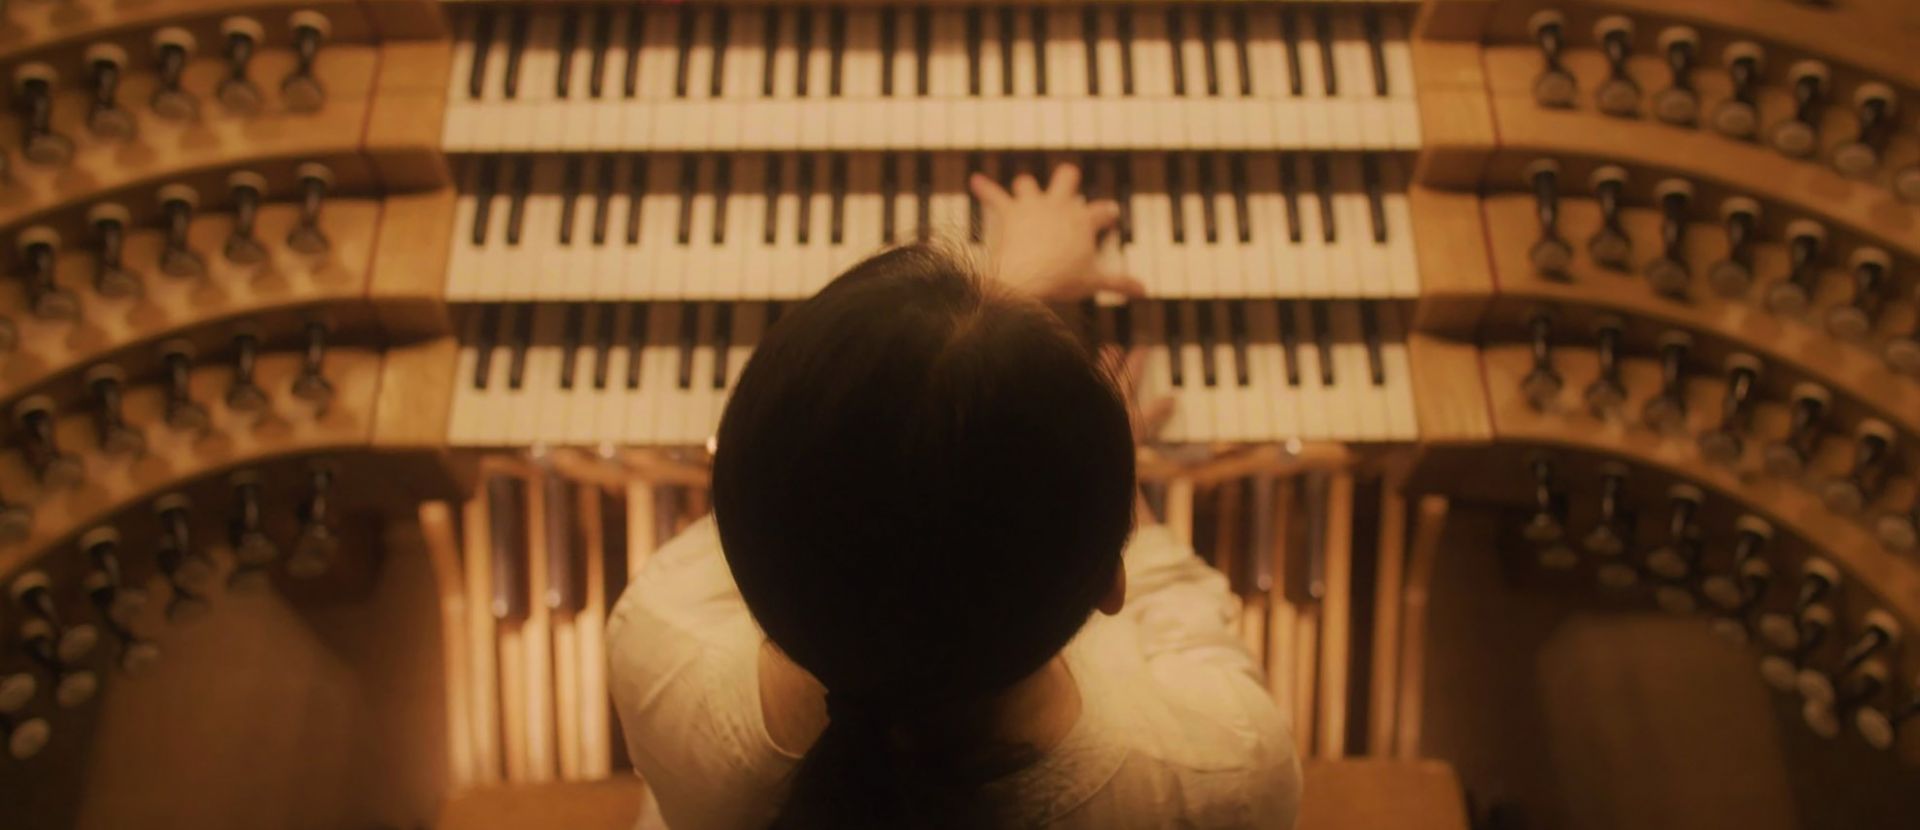 Now, the tense world of … pipe organs?